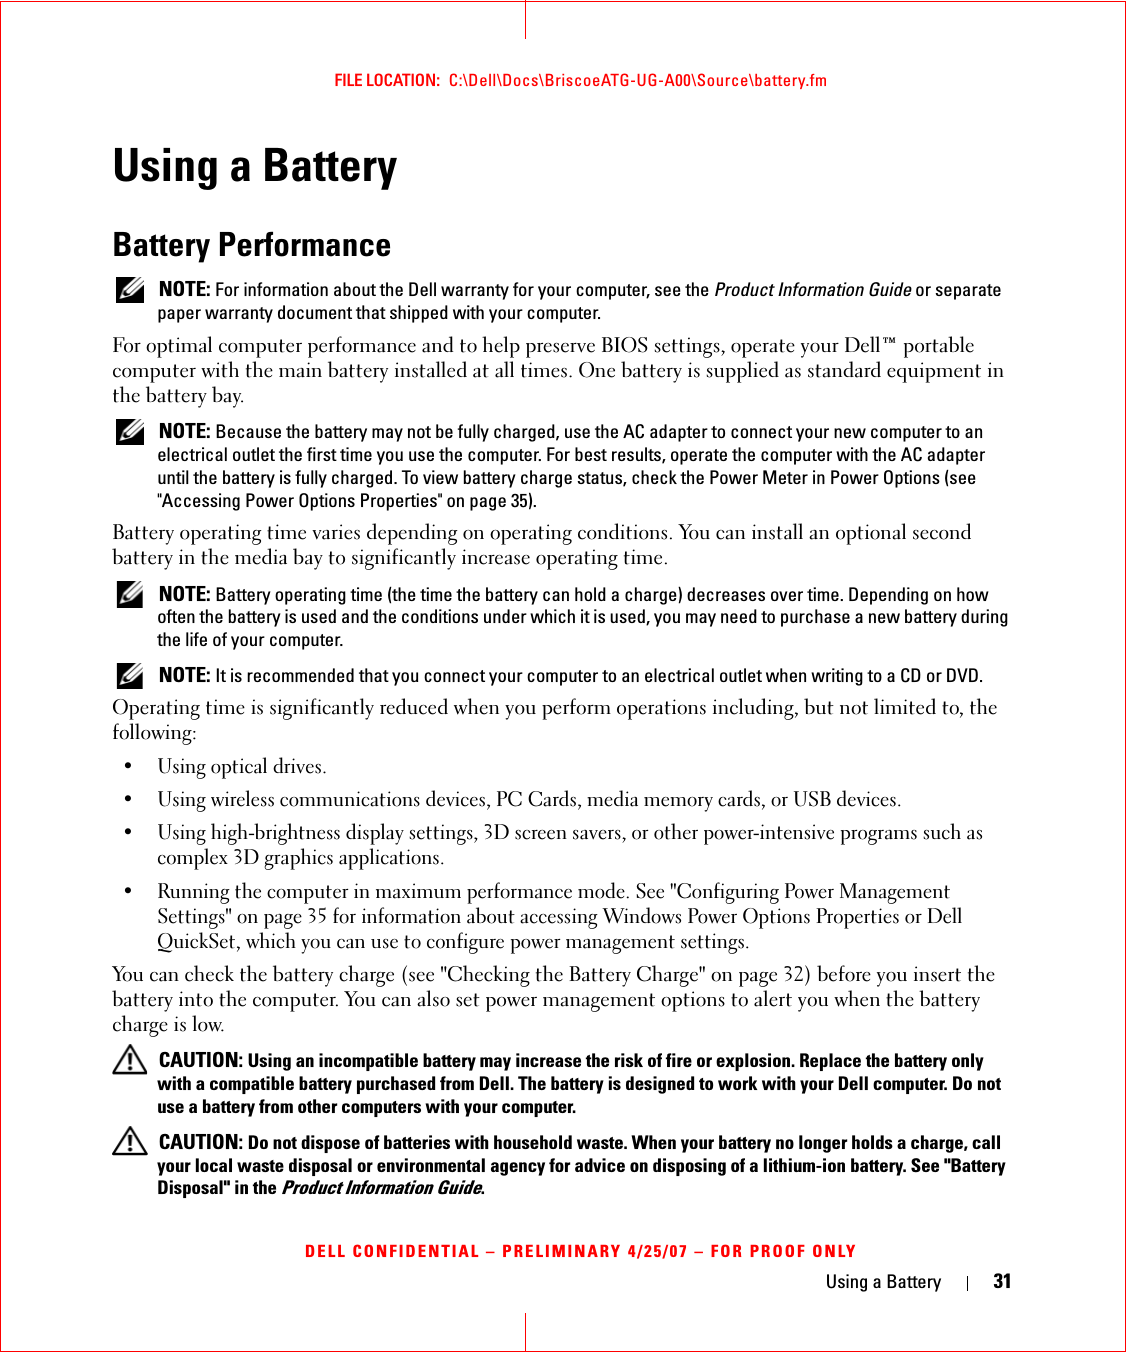 Using a Battery 31FILE LOCATION:  C:\Dell\Docs\BriscoeATG-UG-A00\Source\battery.fmDELL CONFIDENTIAL – PRELIMINARY 4/25/07 – FOR PROOF ONLYUsing a BatteryBattery Performance NOTE: For information about the Dell warranty for your computer, see the Product Information Guide or separate paper warranty document that shipped with your computer.For optimal computer performance and to help preserve BIOS settings, operate your Dell™ portable computer with the main battery installed at all times. One battery is supplied as standard equipment in the battery bay. NOTE: Because the battery may not be fully charged, use the AC adapter to connect your new computer to an electrical outlet the first time you use the computer. For best results, operate the computer with the AC adapter until the battery is fully charged. To view battery charge status, check the Power Meter in Power Options (see &quot;Accessing Power Options Properties&quot; on page 35).Battery operating time varies depending on operating conditions. You can install an optional second battery in the media bay to significantly increase operating time. NOTE: Battery operating time (the time the battery can hold a charge) decreases over time. Depending on how often the battery is used and the conditions under which it is used, you may need to purchase a new battery during the life of your computer. NOTE: It is recommended that you connect your computer to an electrical outlet when writing to a CD or DVD.Operating time is significantly reduced when you perform operations including, but not limited to, the following:• Using optical drives.• Using wireless communications devices, PC Cards, media memory cards, or USB devices.• Using high-brightness display settings, 3D screen savers, or other power-intensive programs such as complex 3D graphics applications.• Running the computer in maximum performance mode. See &quot;Configuring Power Management Settings&quot; on page 35 for information about accessing Windows Power Options Properties or Dell QuickSet, which you can use to configure power management settings.You can check the battery charge (see &quot;Checking the Battery Charge&quot; on page 32) before you insert the battery into the computer. You can also set power management options to alert you when the battery charge is low. CAUTION: Using an incompatible battery may increase the risk of fire or explosion. Replace the battery only with a compatible battery purchased from Dell. The battery is designed to work with your Dell computer. Do not use a battery from other computers with your computer.  CAUTION: Do not dispose of batteries with household waste. When your battery no longer holds a charge, call your local waste disposal or environmental agency for advice on disposing of a lithium-ion battery. See &quot;Battery Disposal&quot; in the Product Information Guide.